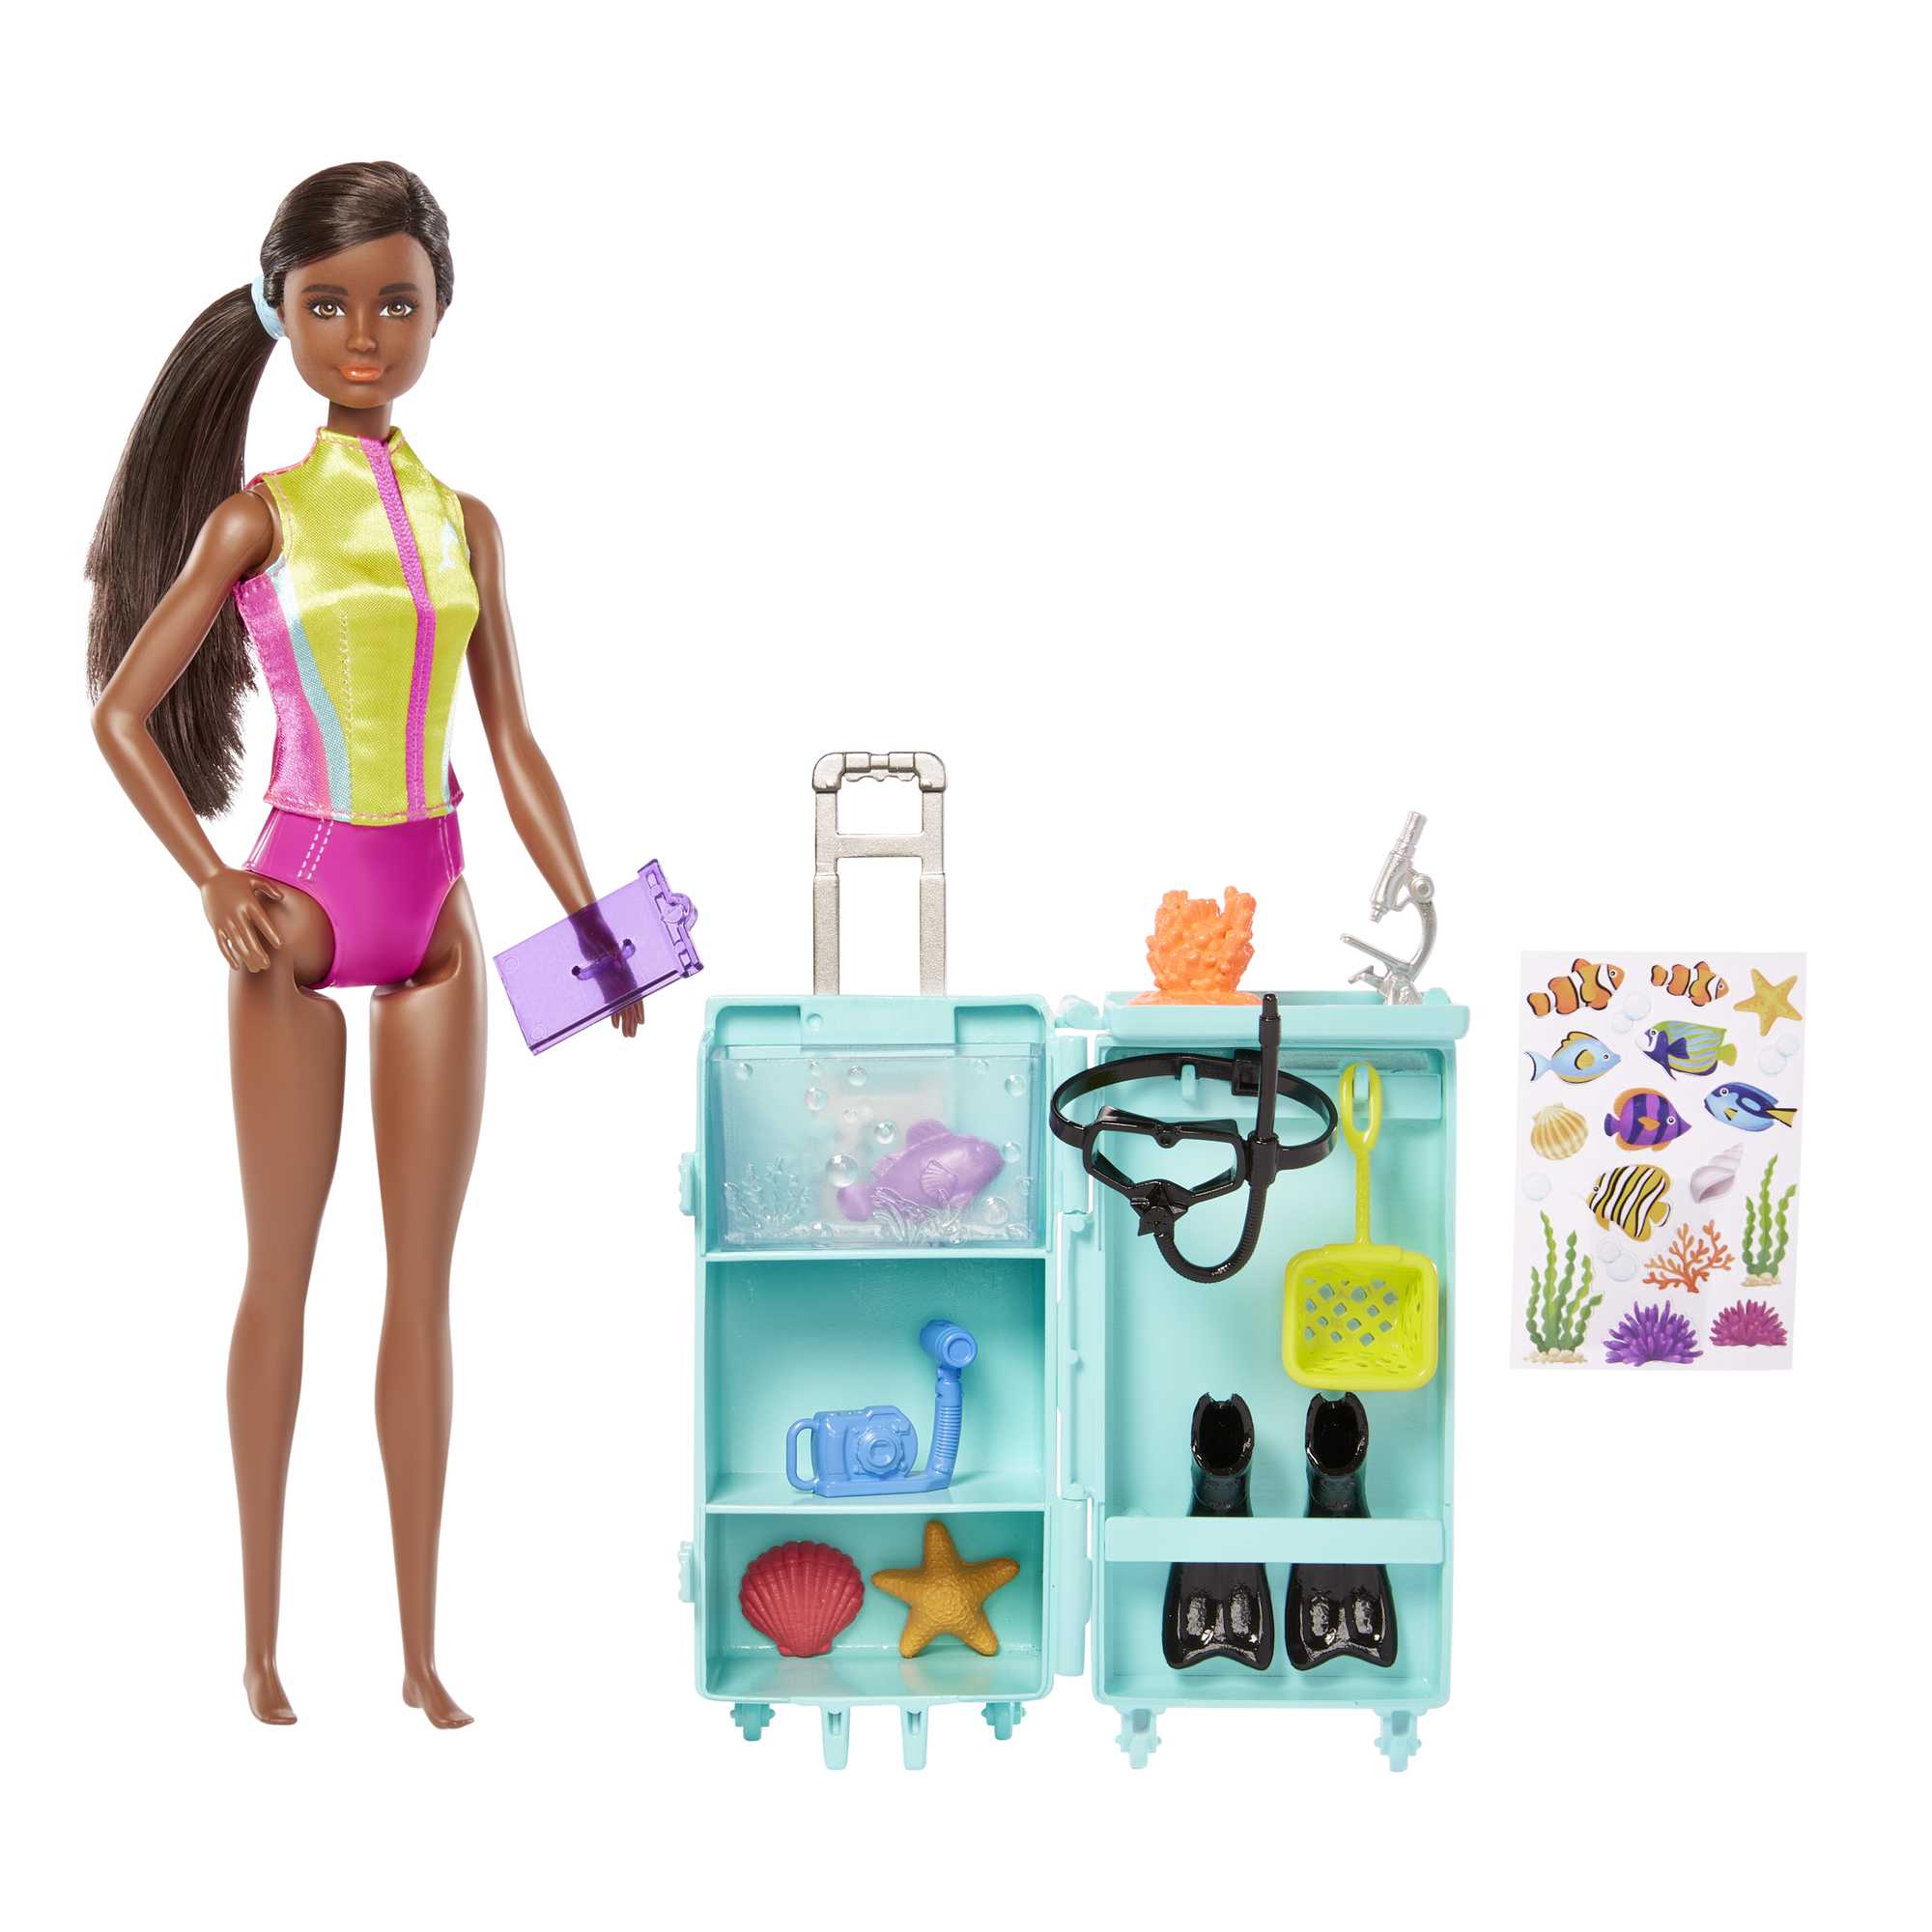 Barbie Doll and Accessories, Marine Biologist Playset